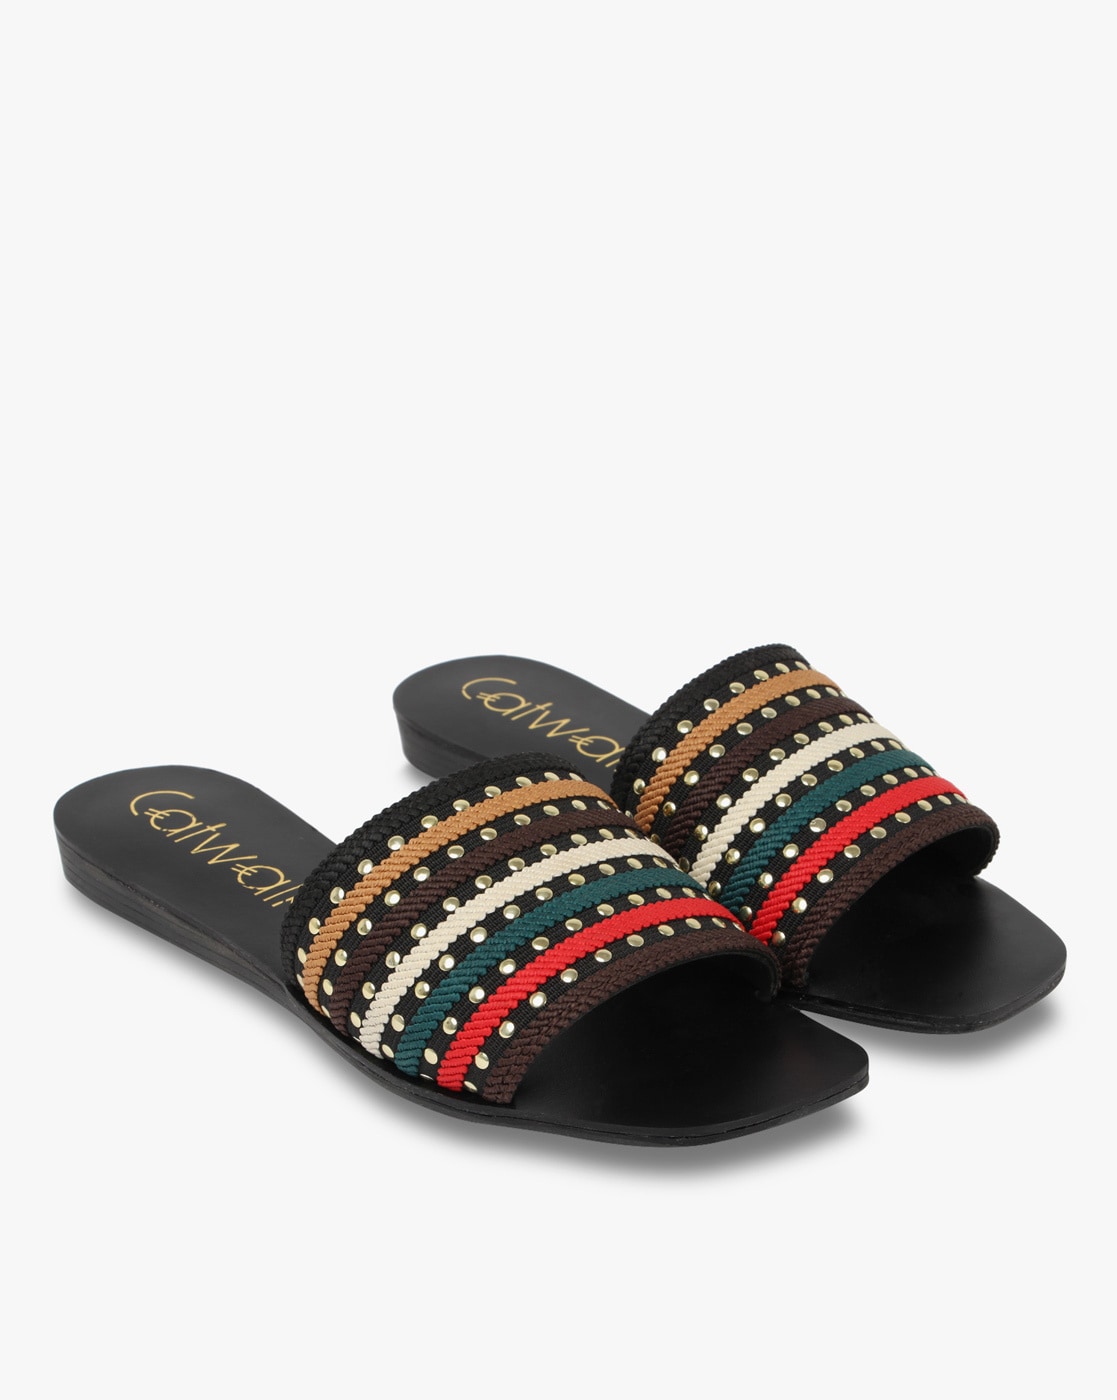 among Pacific Islands Rug Buy Black Flat Sandals for Women by CATWALK Online | Ajio.com